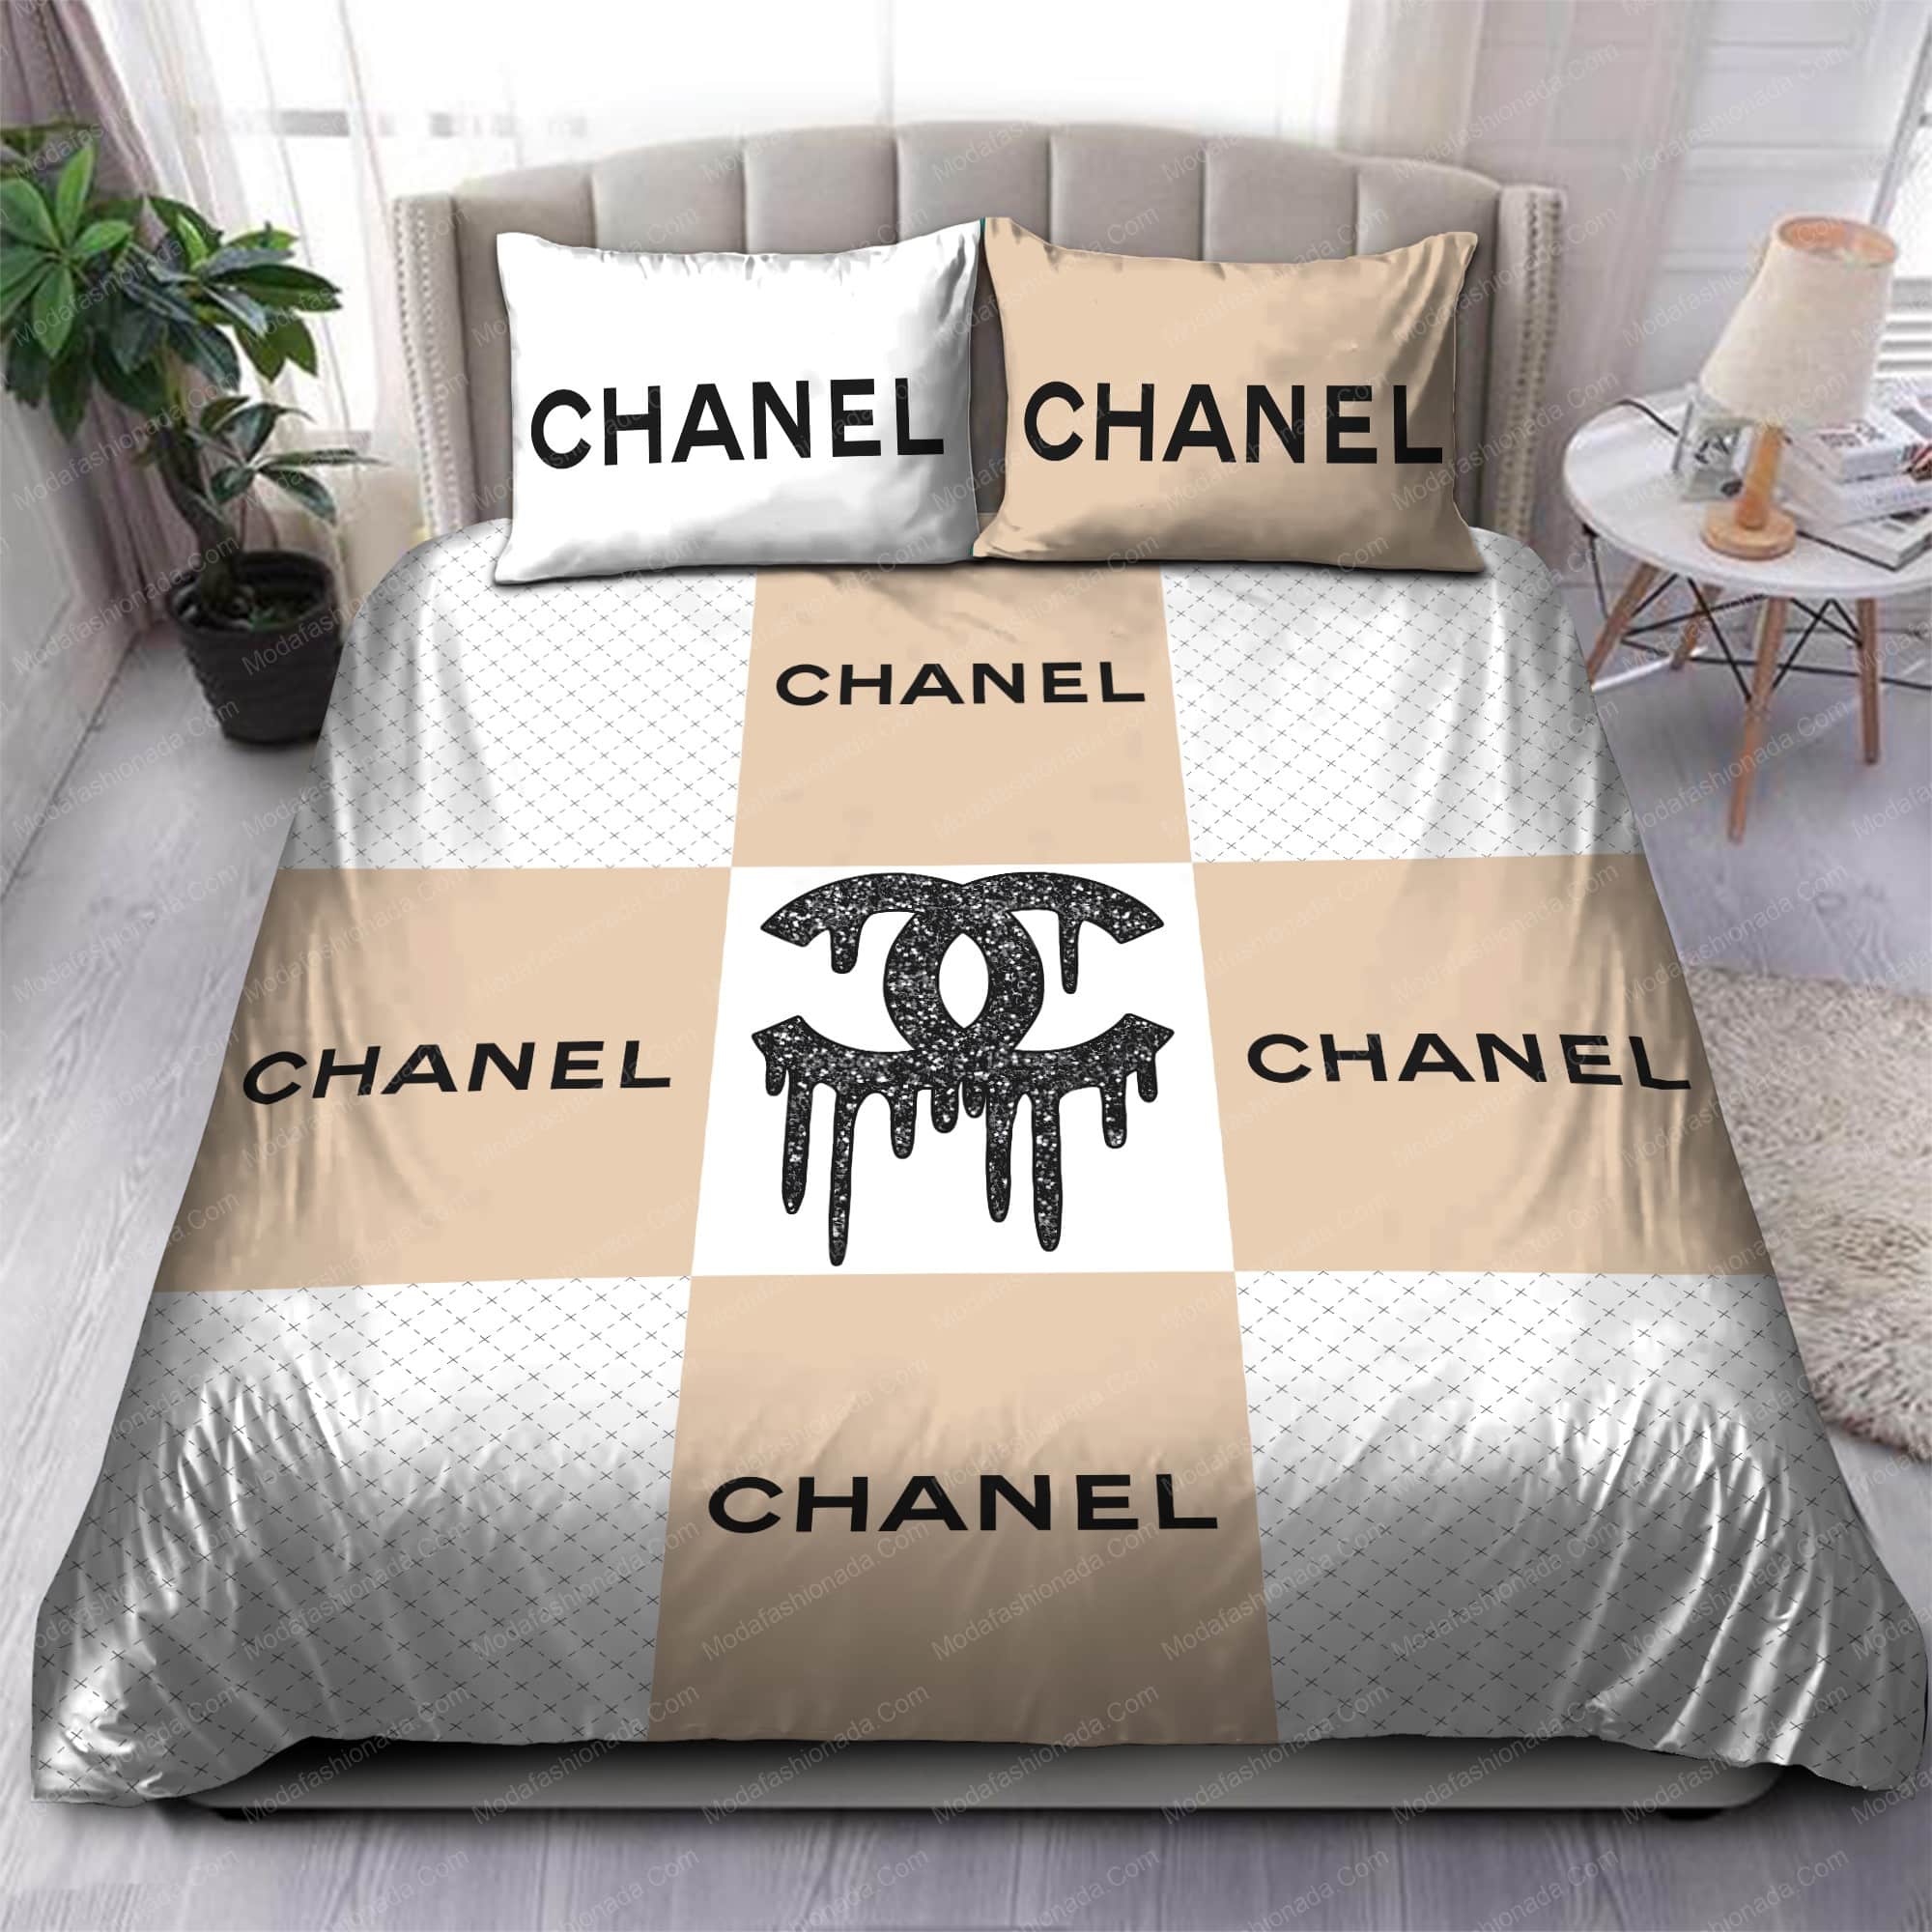 Elegance designer bedding uk limited - CHANEL COMPLETE SET (KINGSIZE) sleep  in style with this chanel complete set which includes 1. duvet cover 1.  fitted sheet 2. pillowcases kingsize..£30.00 NOW OUT OF STOCK